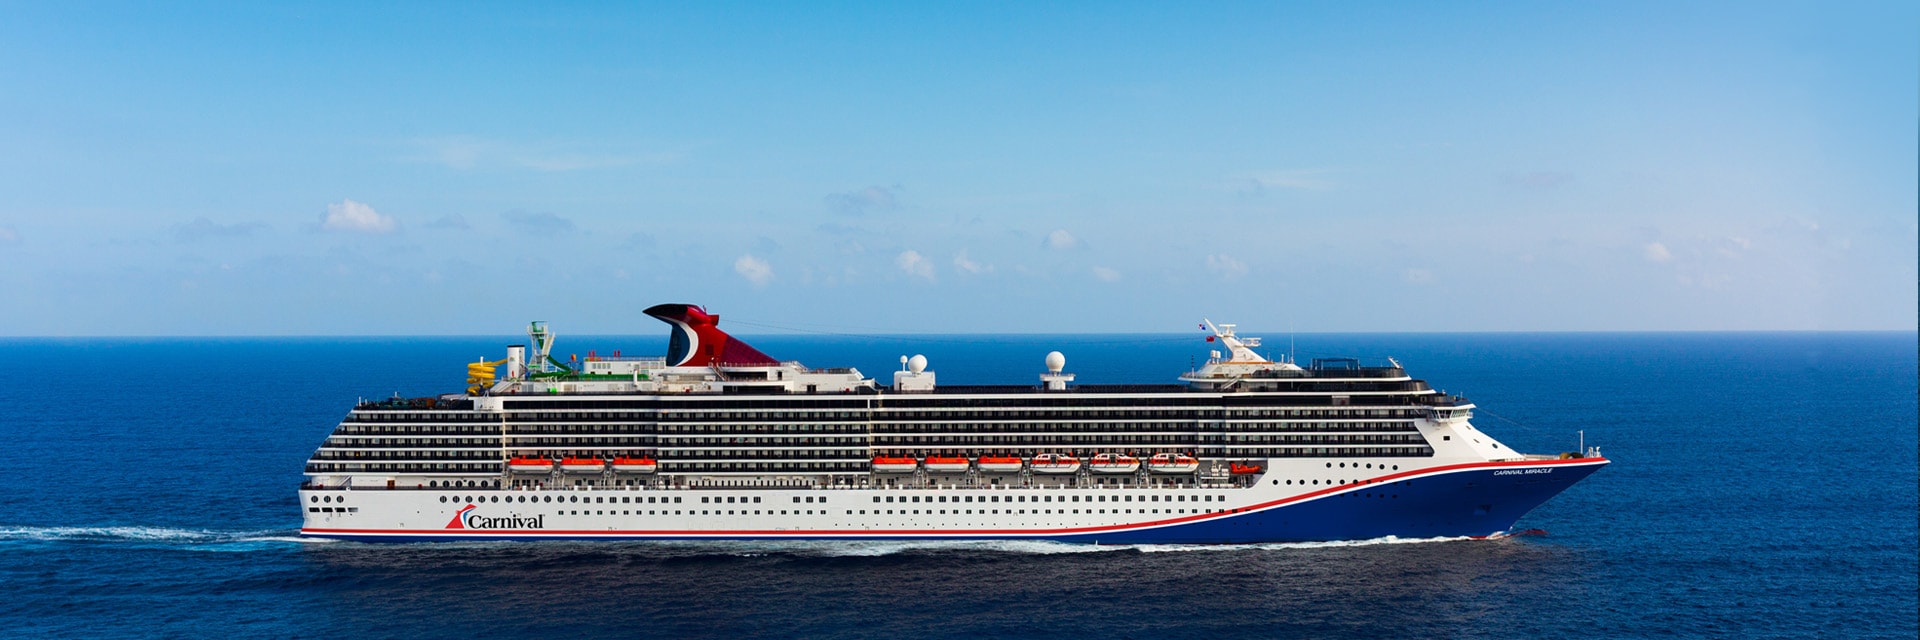 15-Day Europe Cruise from London - Carnival Cruise Line